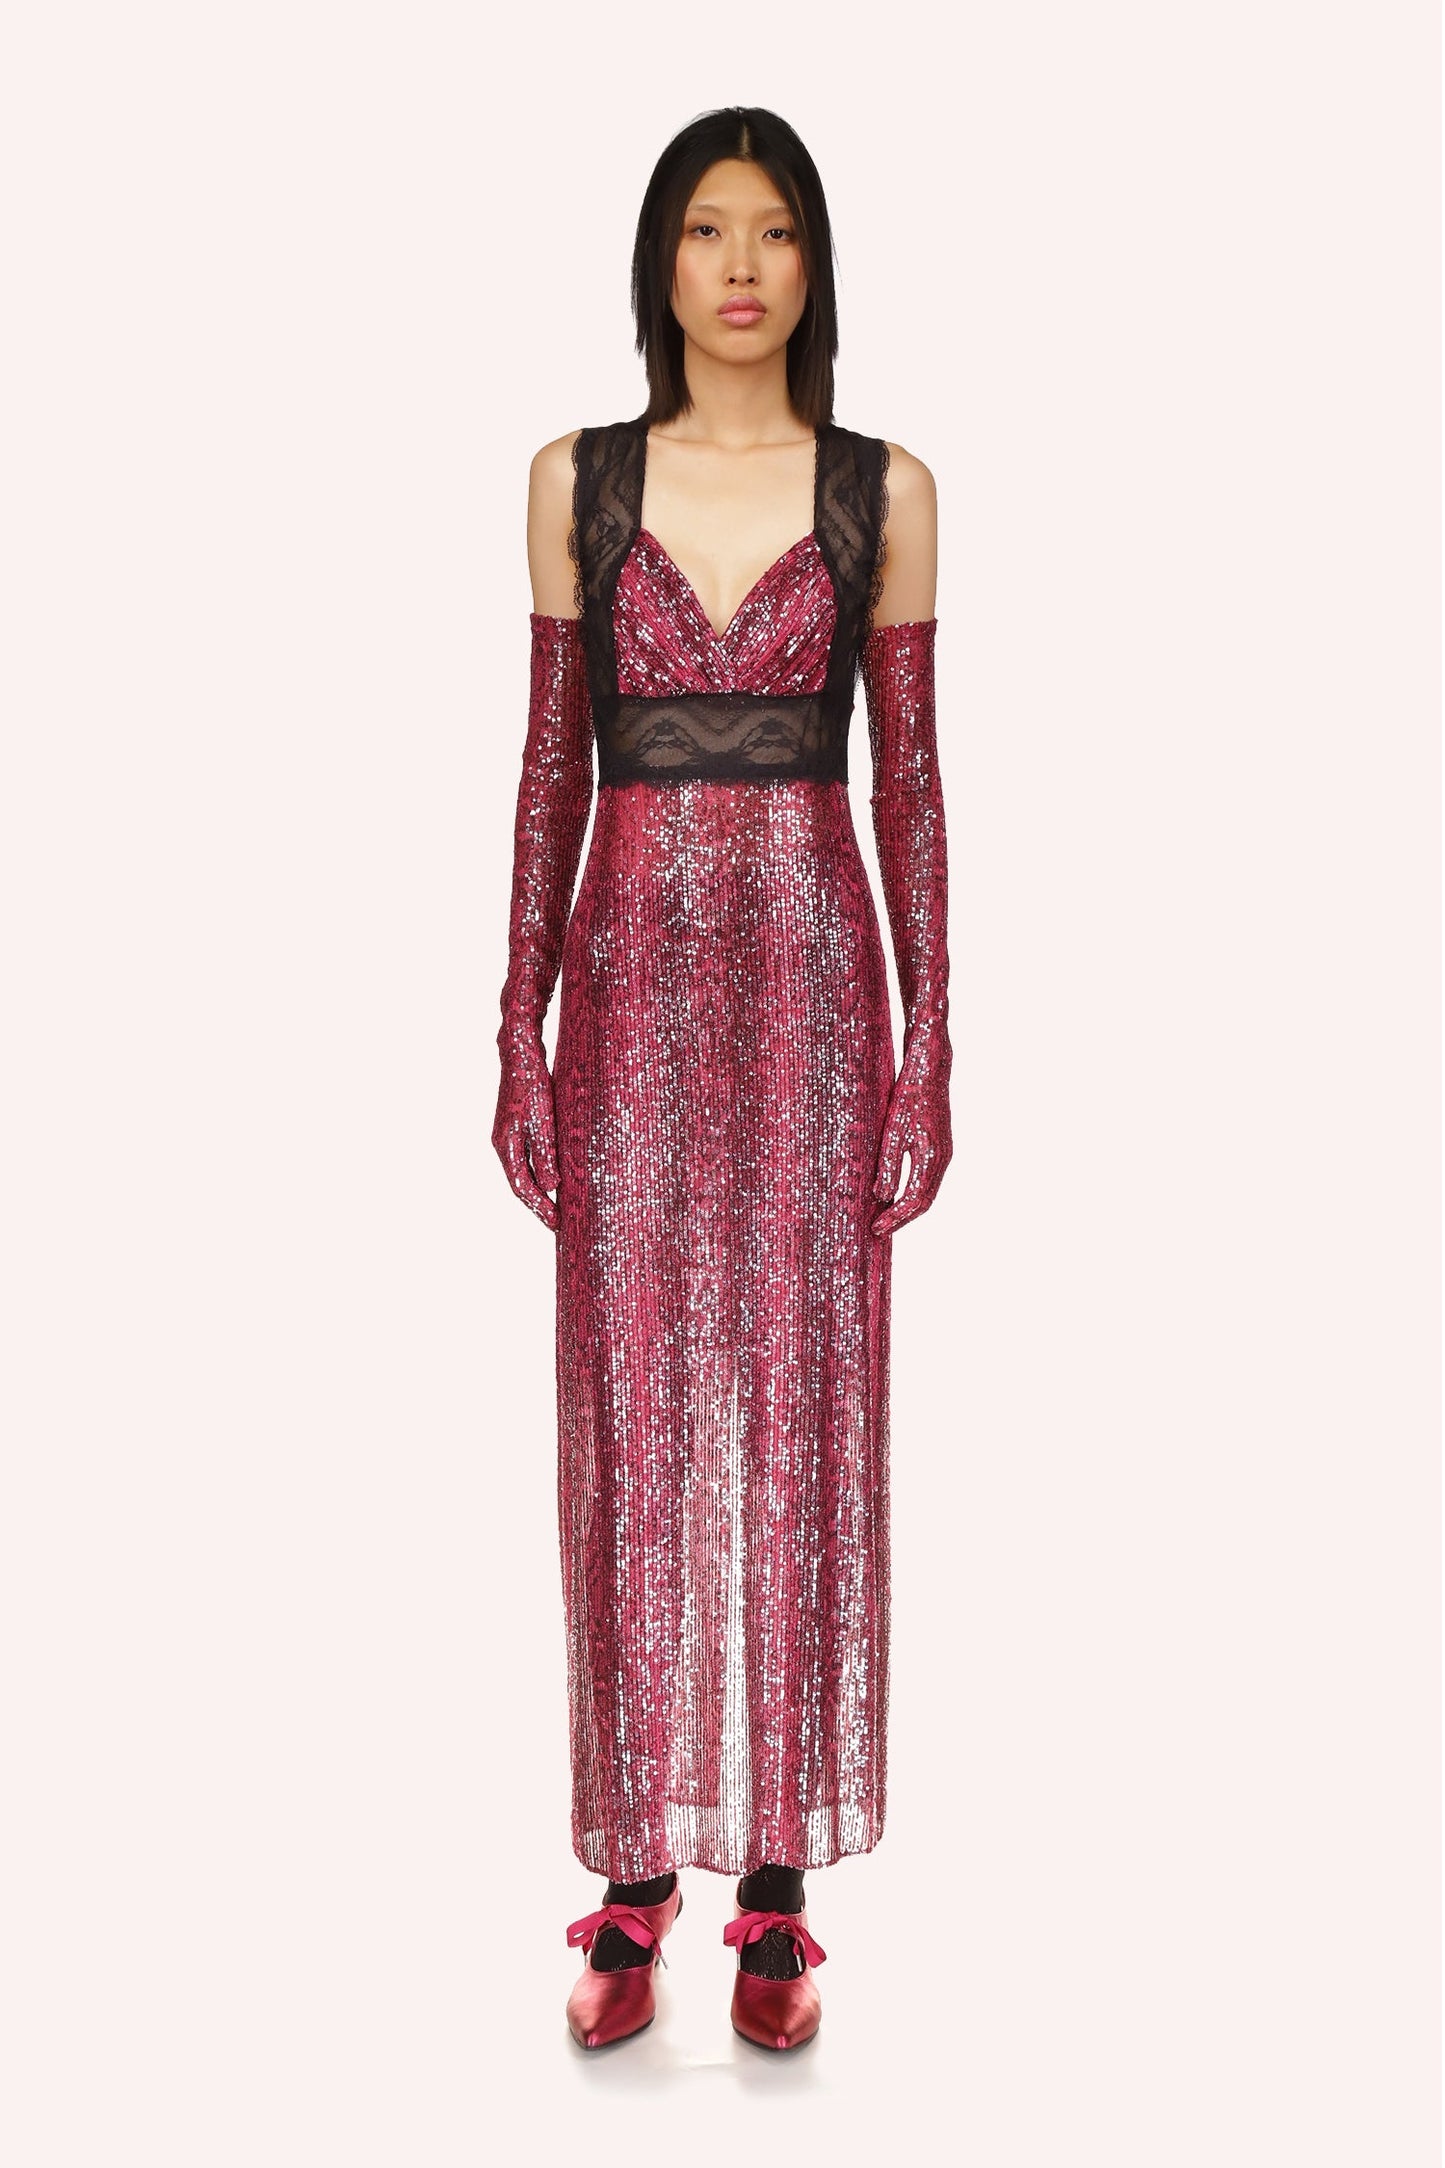 Red Snakeskin Dress is a long V-neck cut dress with black lace under the bust and over the shoulder